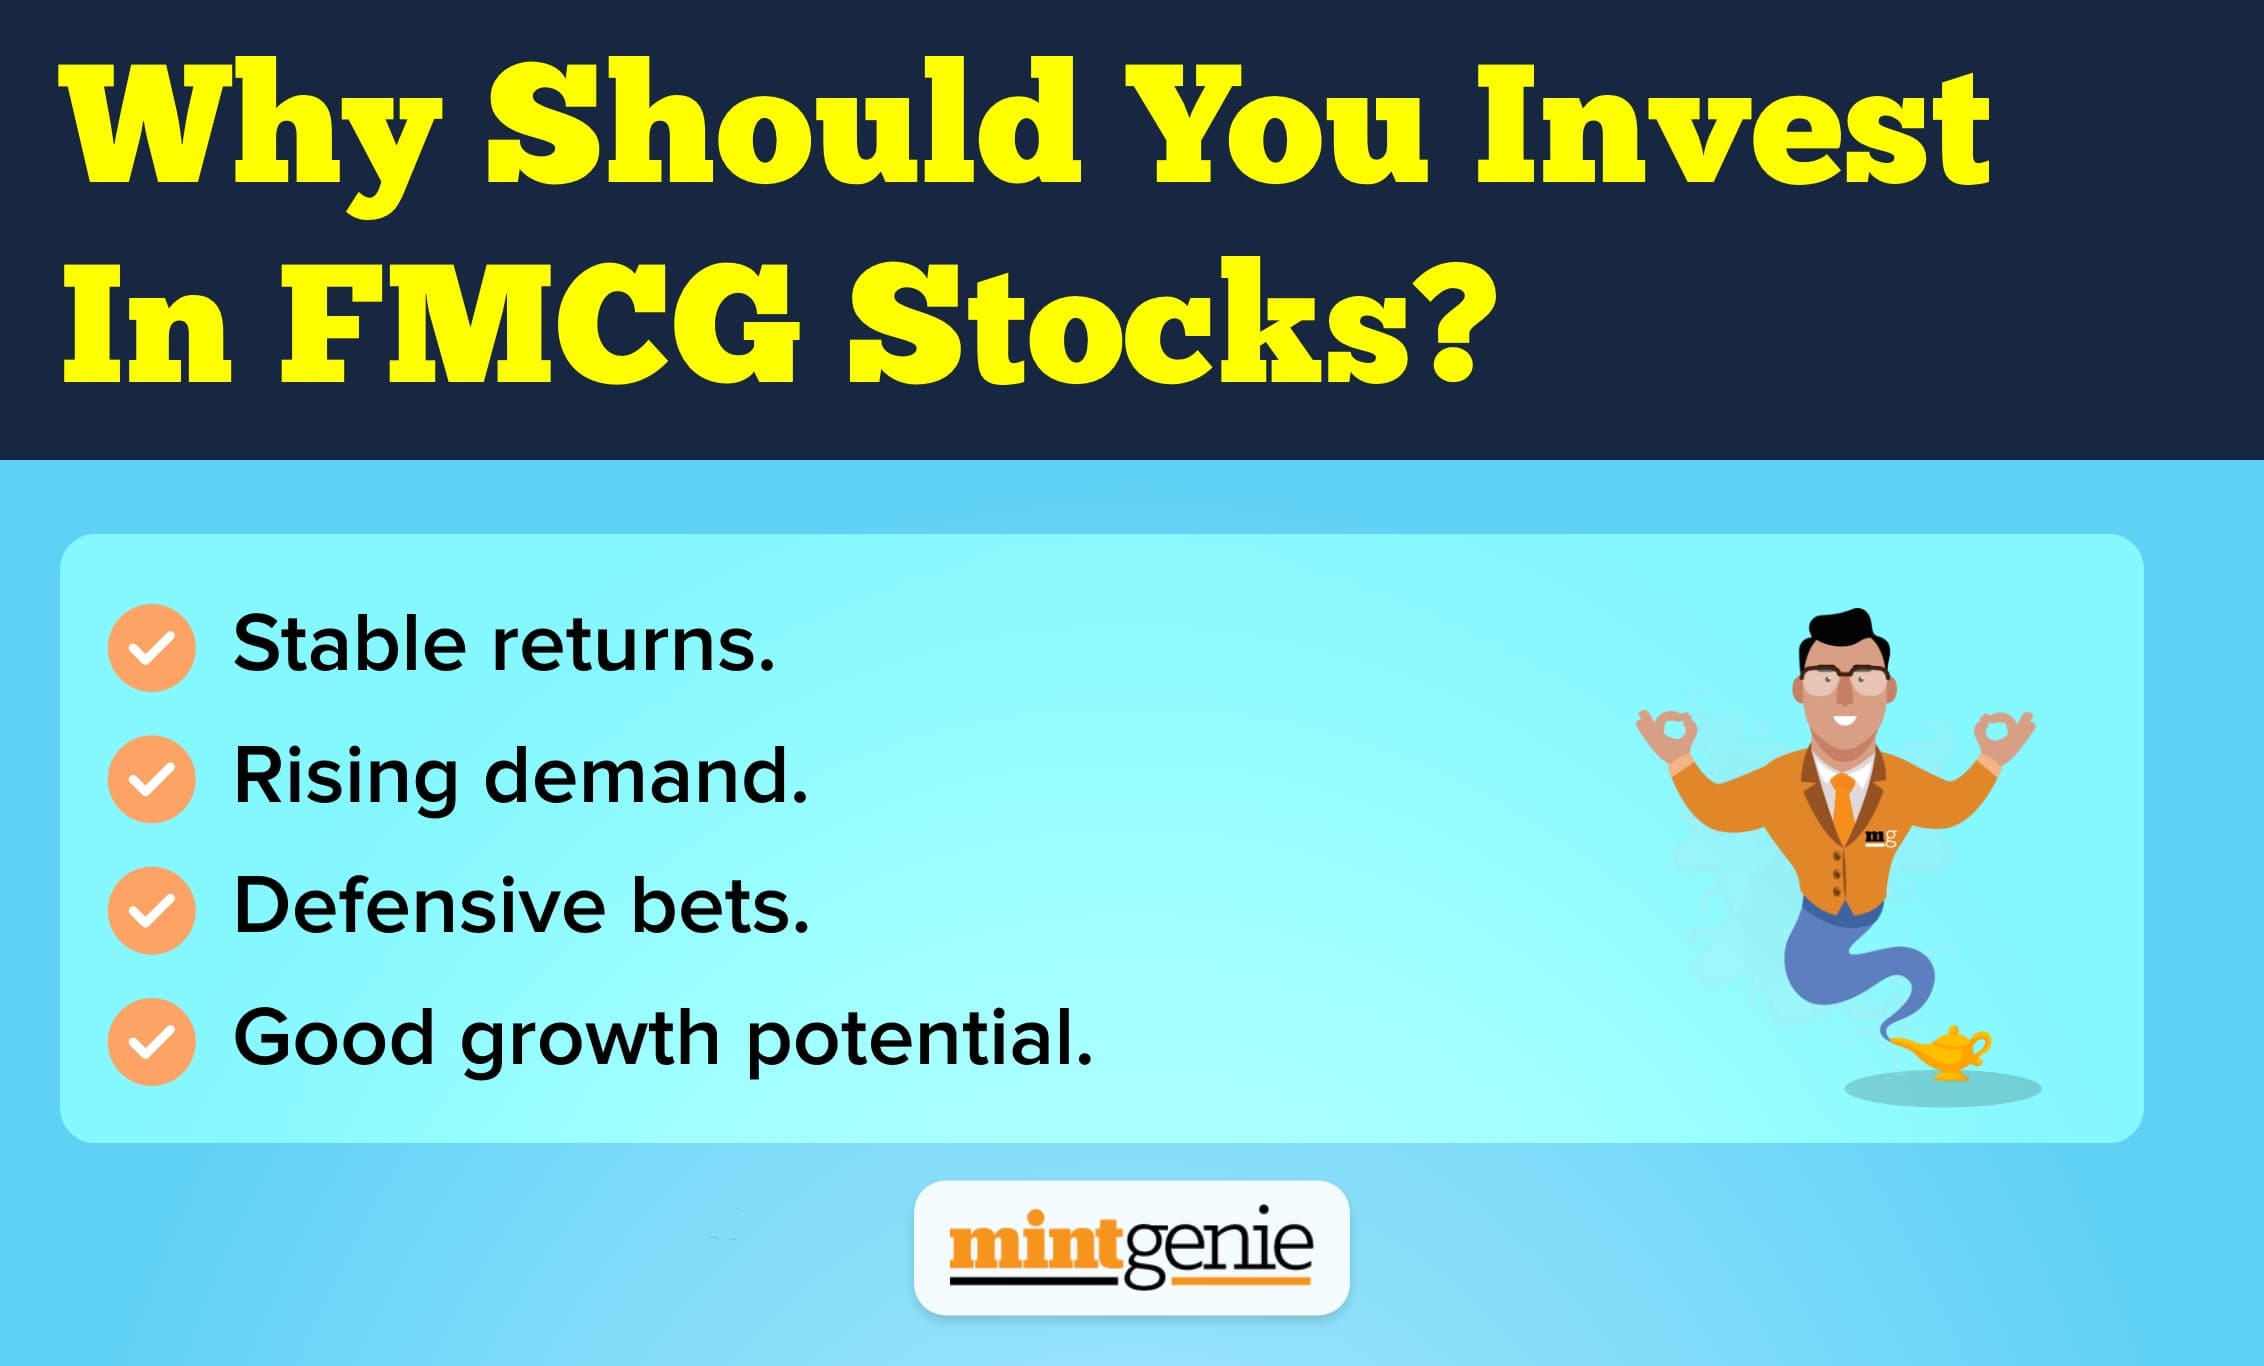 Why should you buy FMCG stocks?